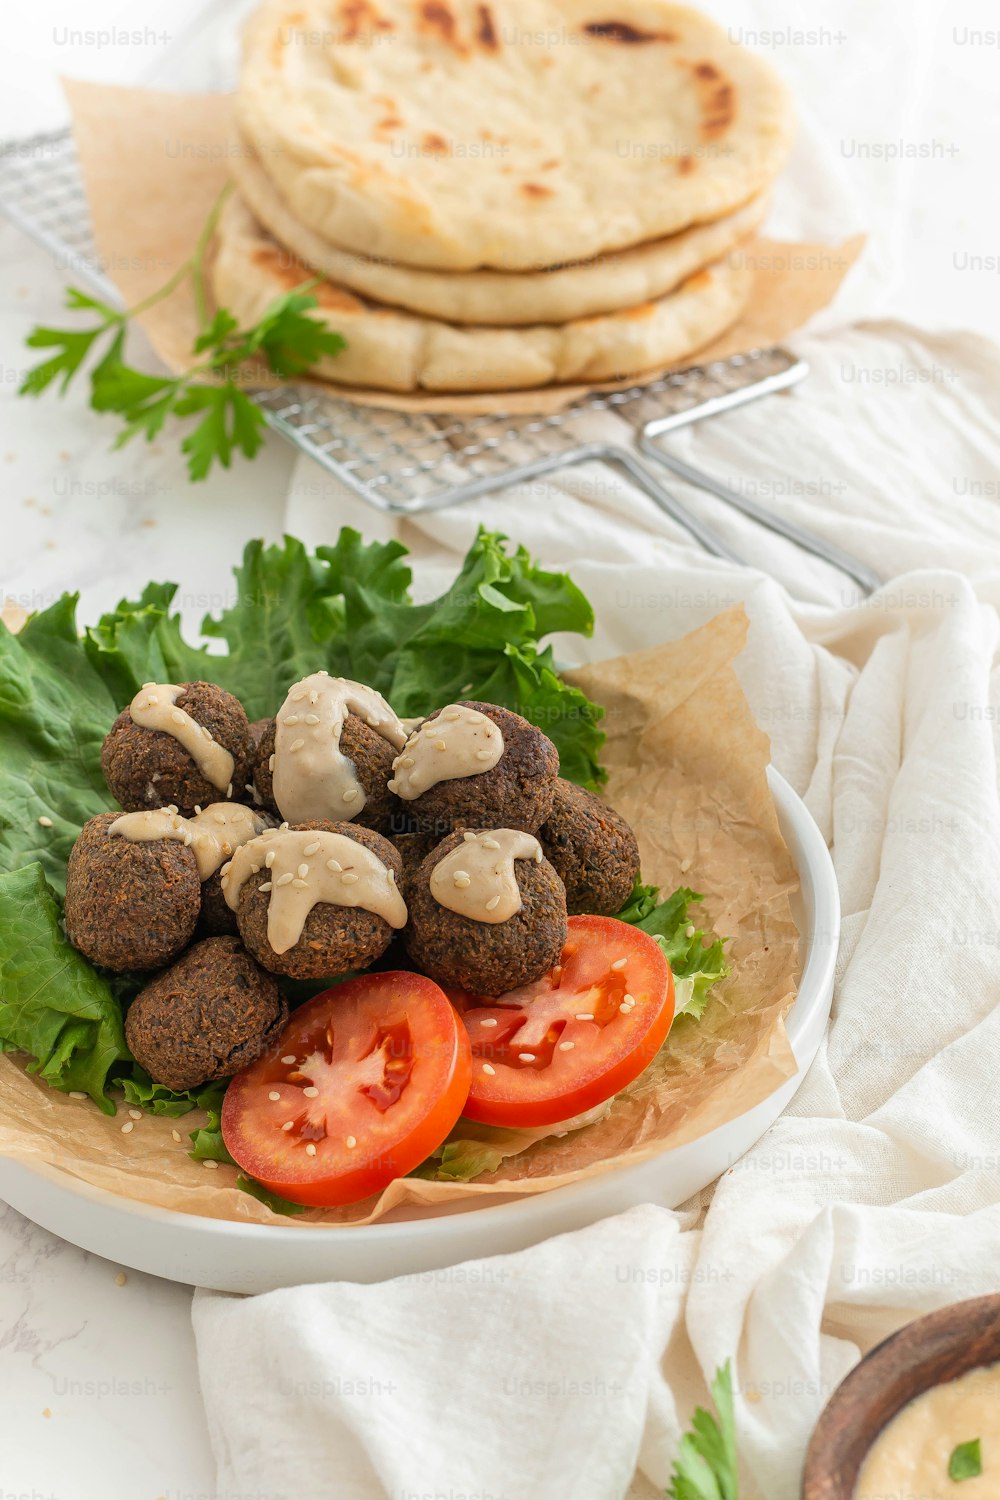 a plate of falafel and pita bread on a table